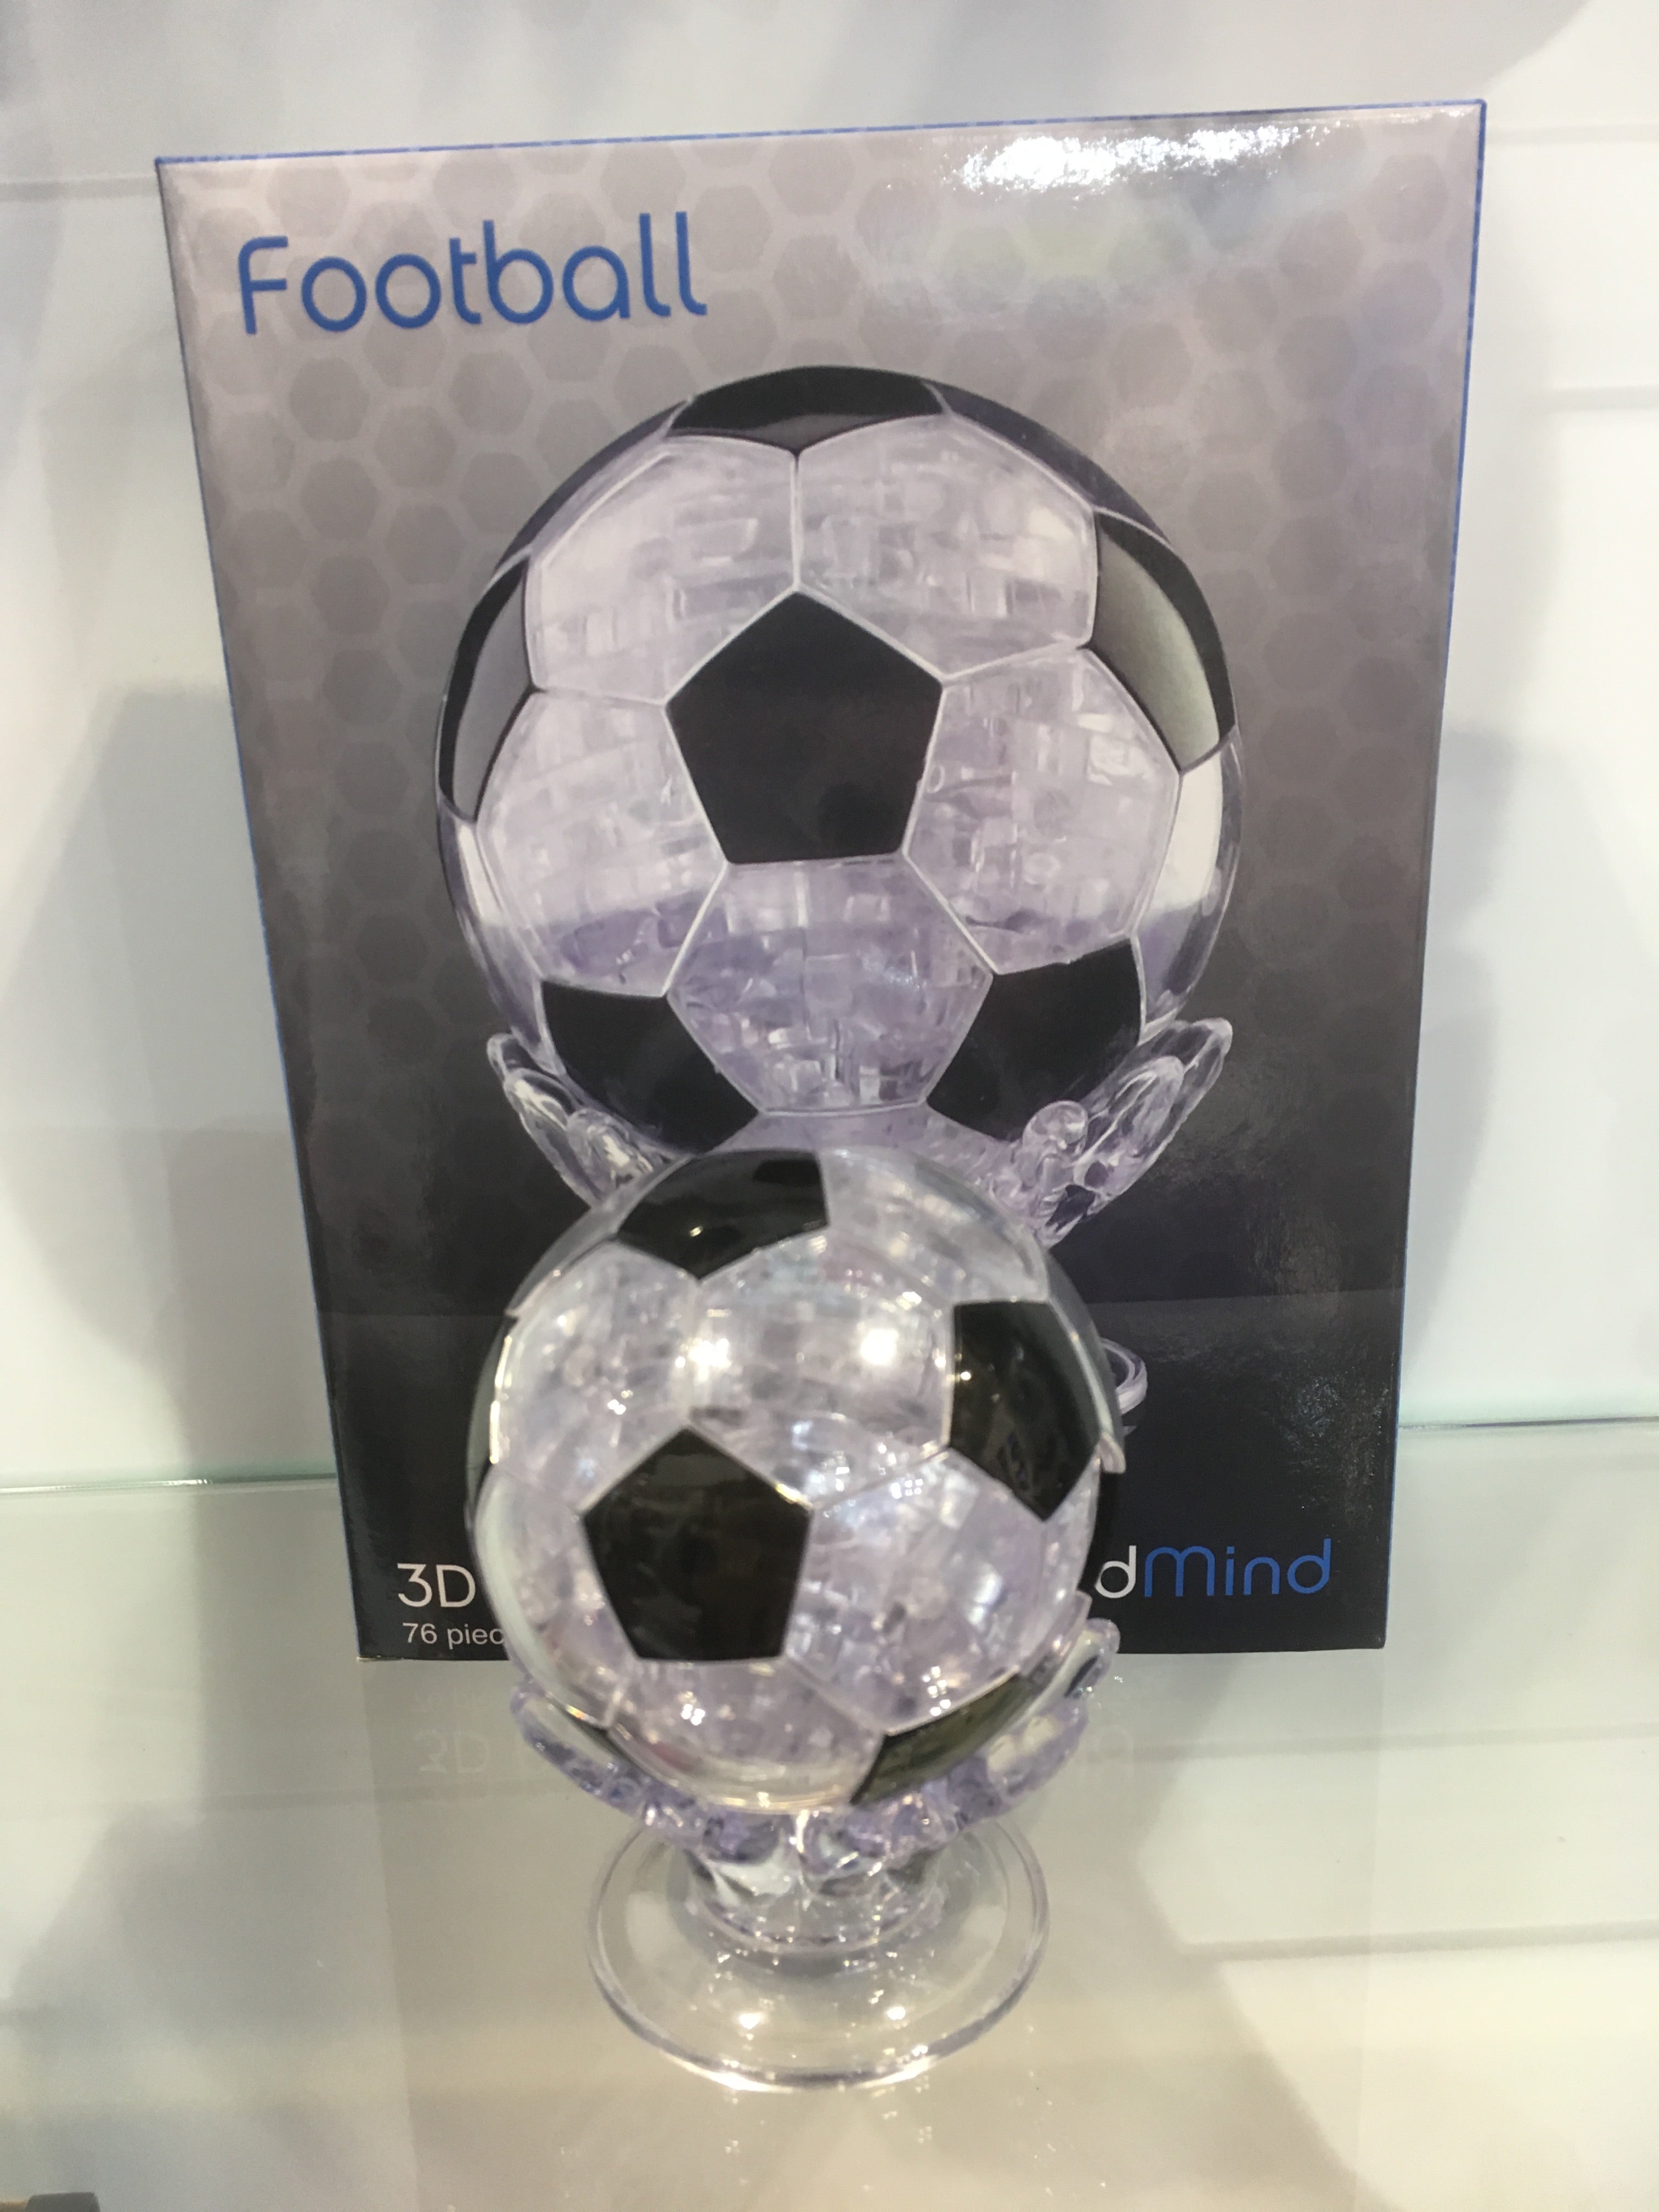 Puzzle 3D - Football